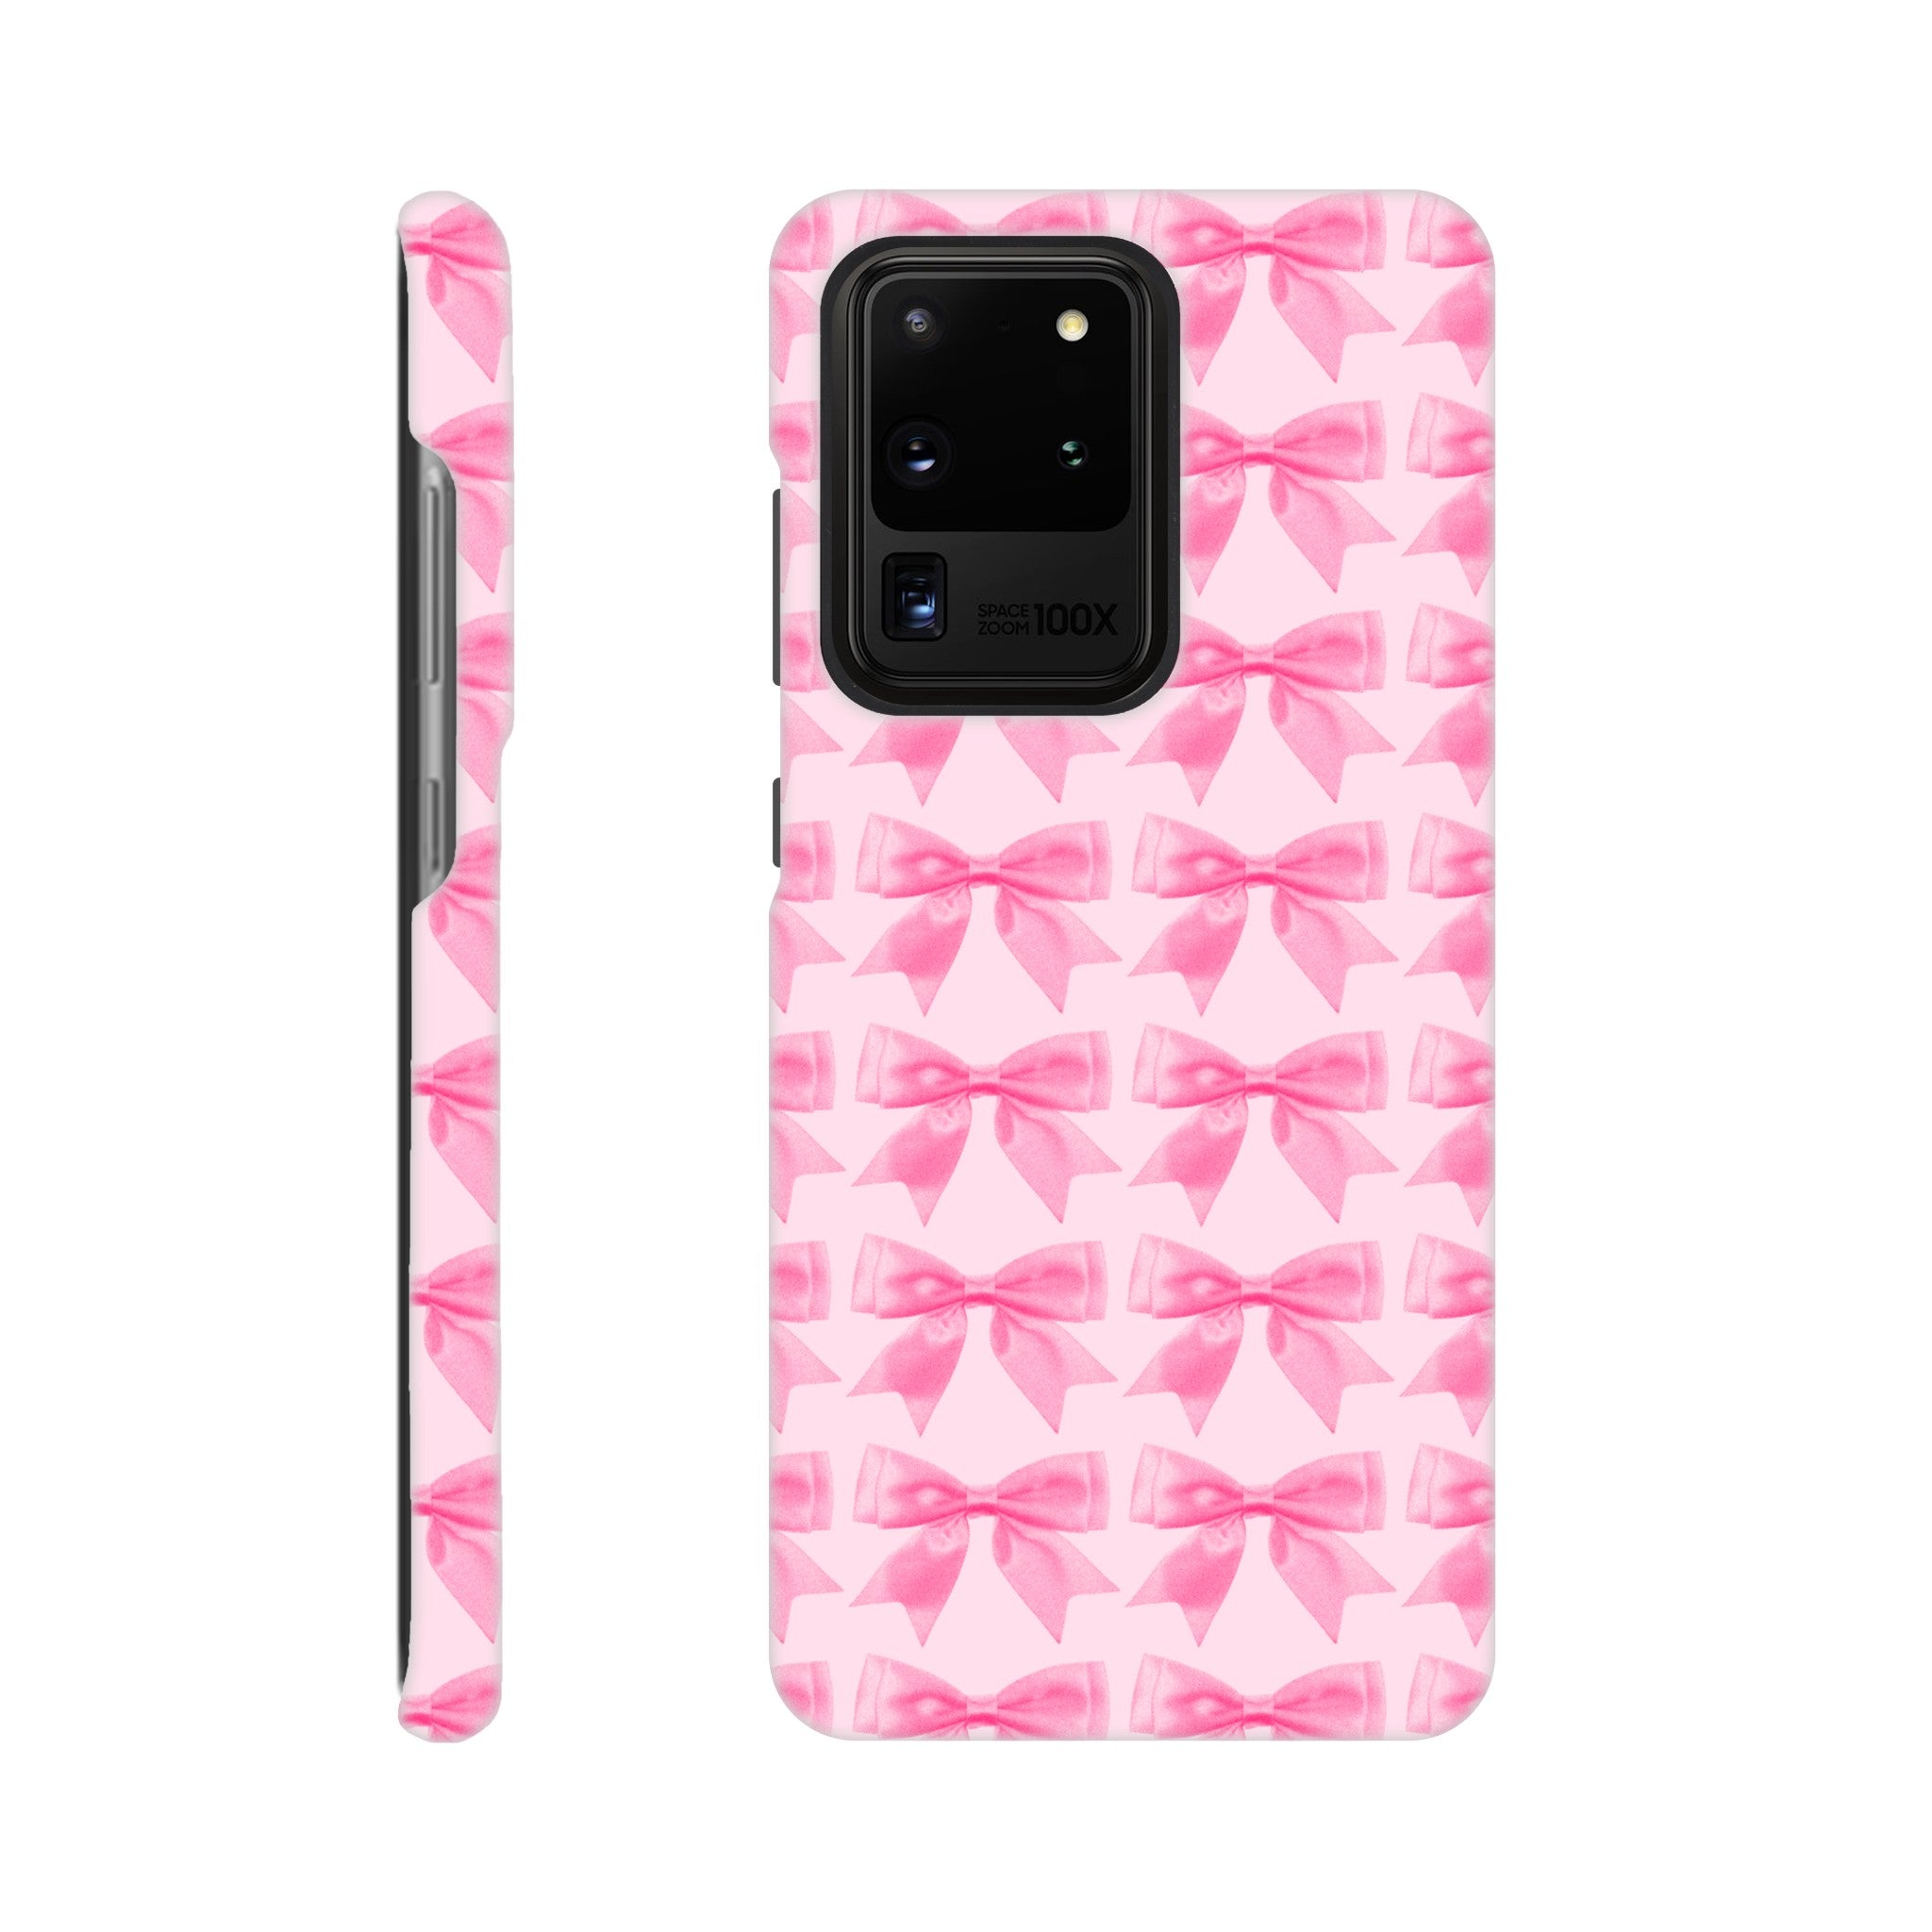 'Put a Bow On It' phone case - In Print We Trust